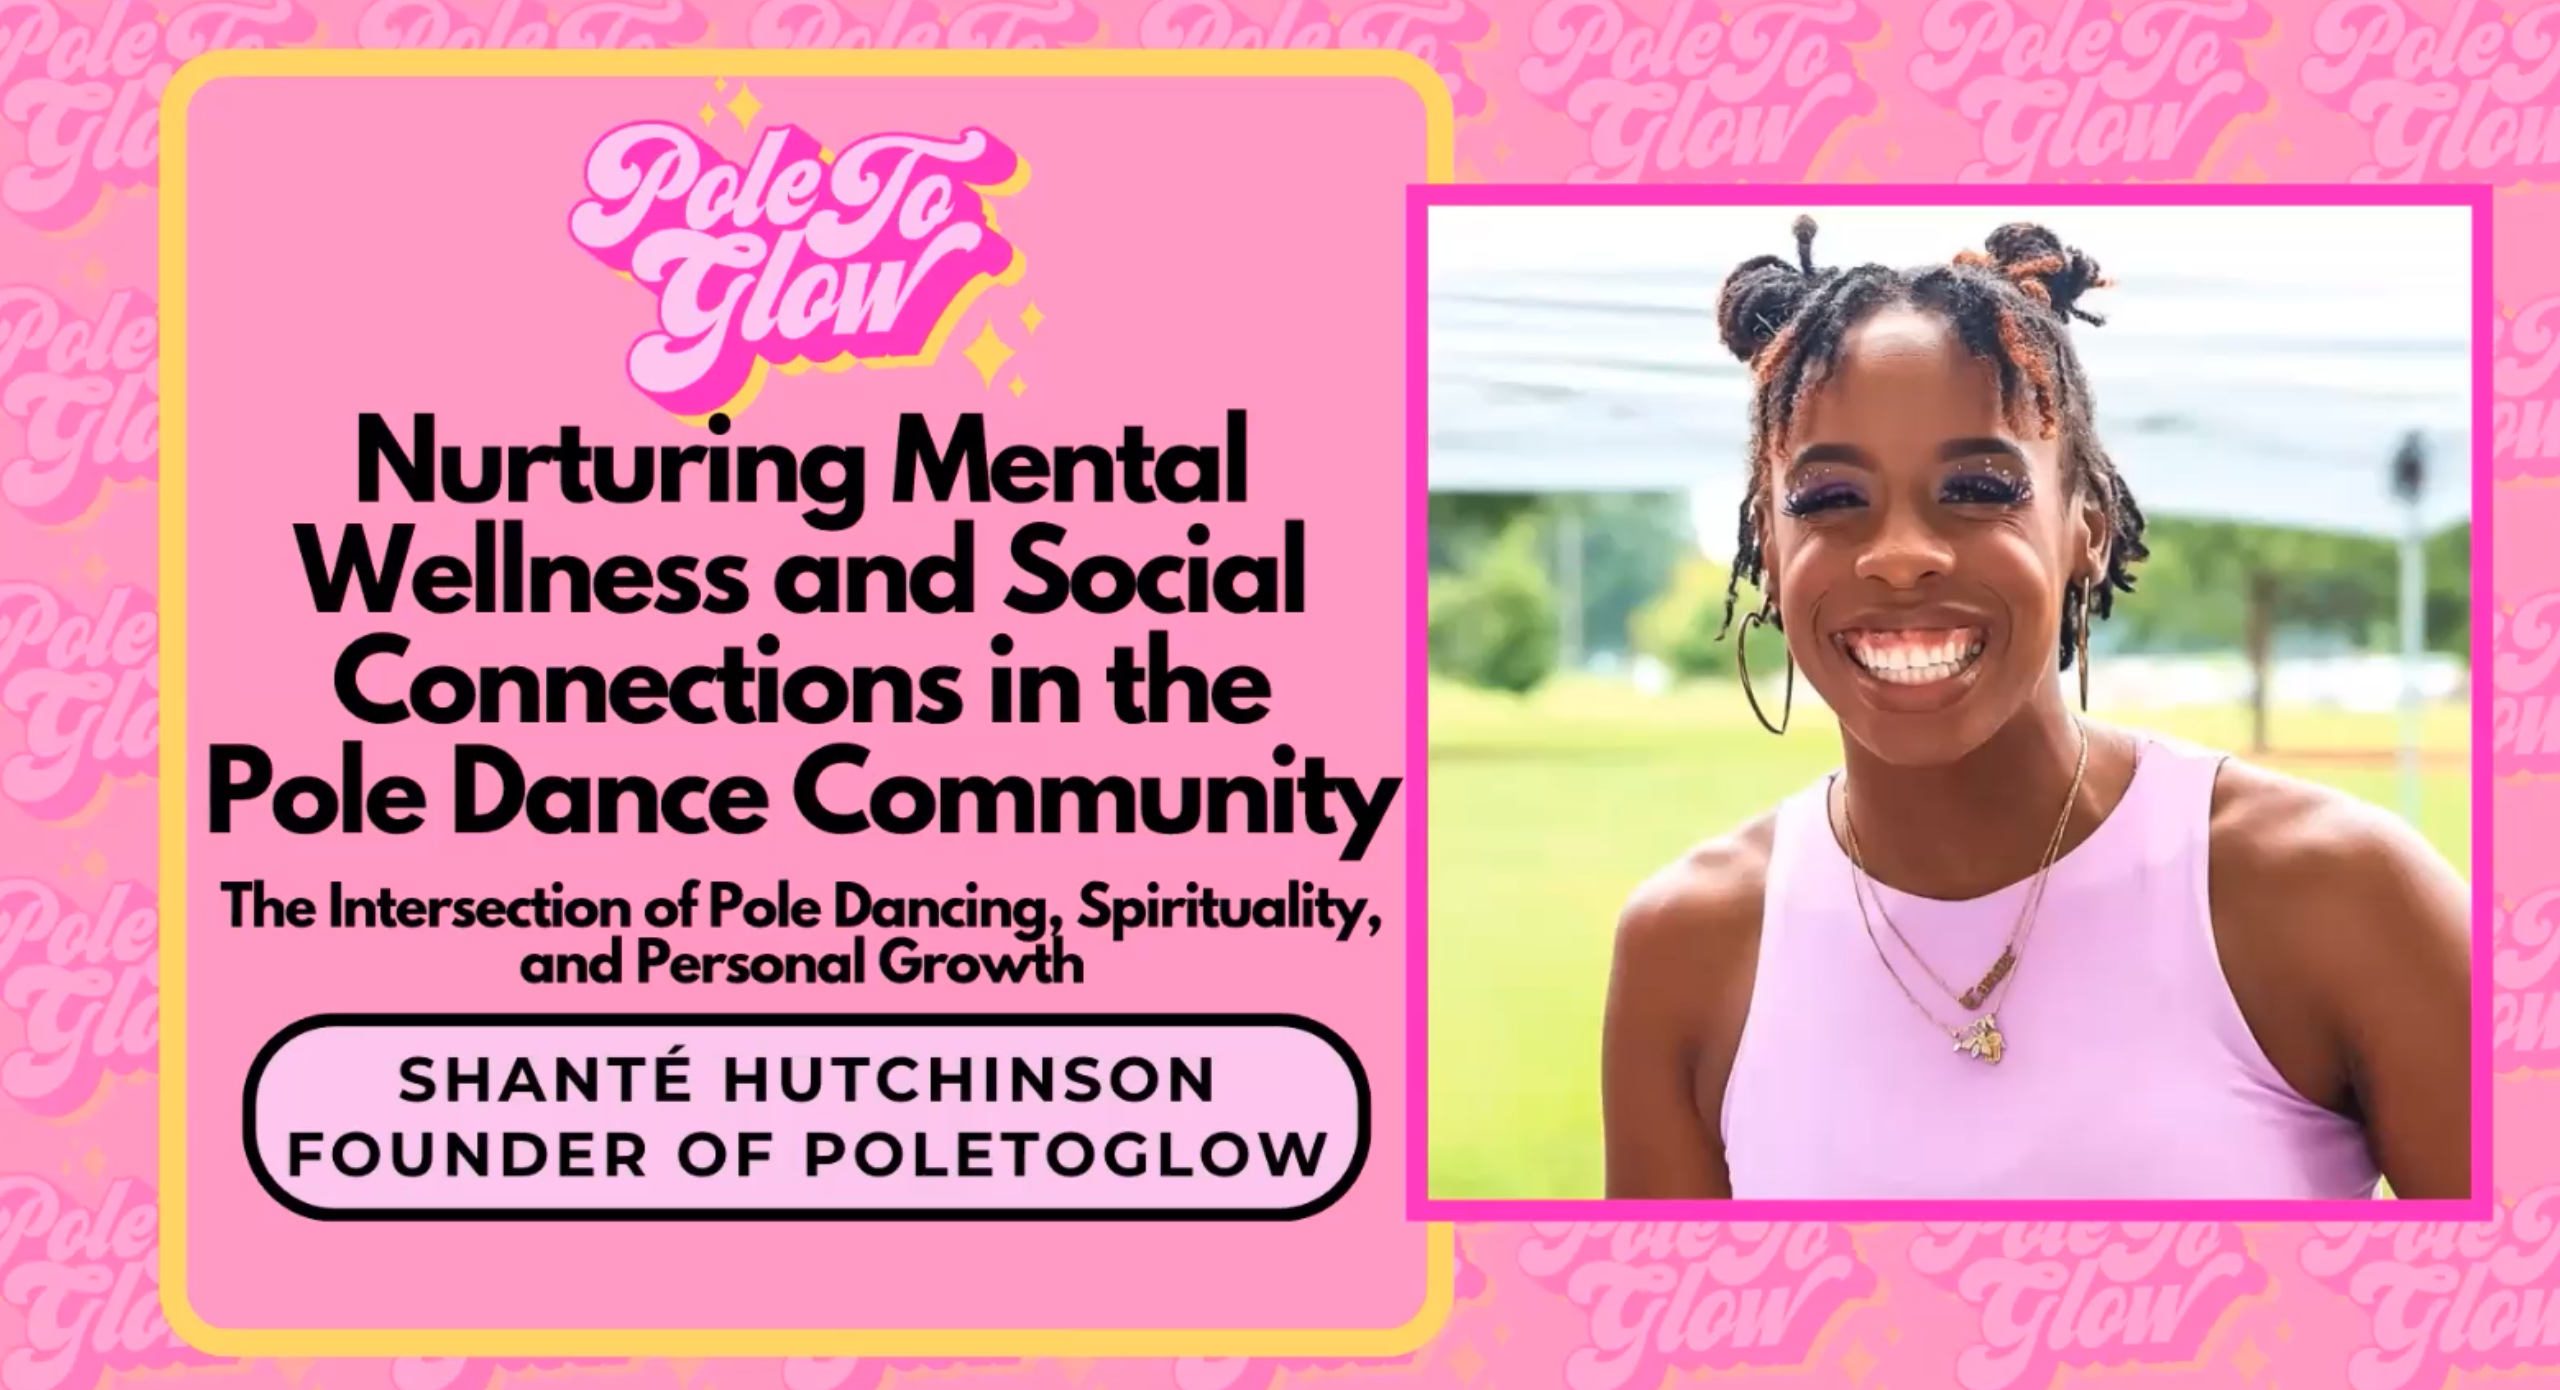 Pole To Glow logo. Text: Nurturing Mental Wellness and Social Connection in the Pole Dance Community with Shante Hutchinson, Founder.